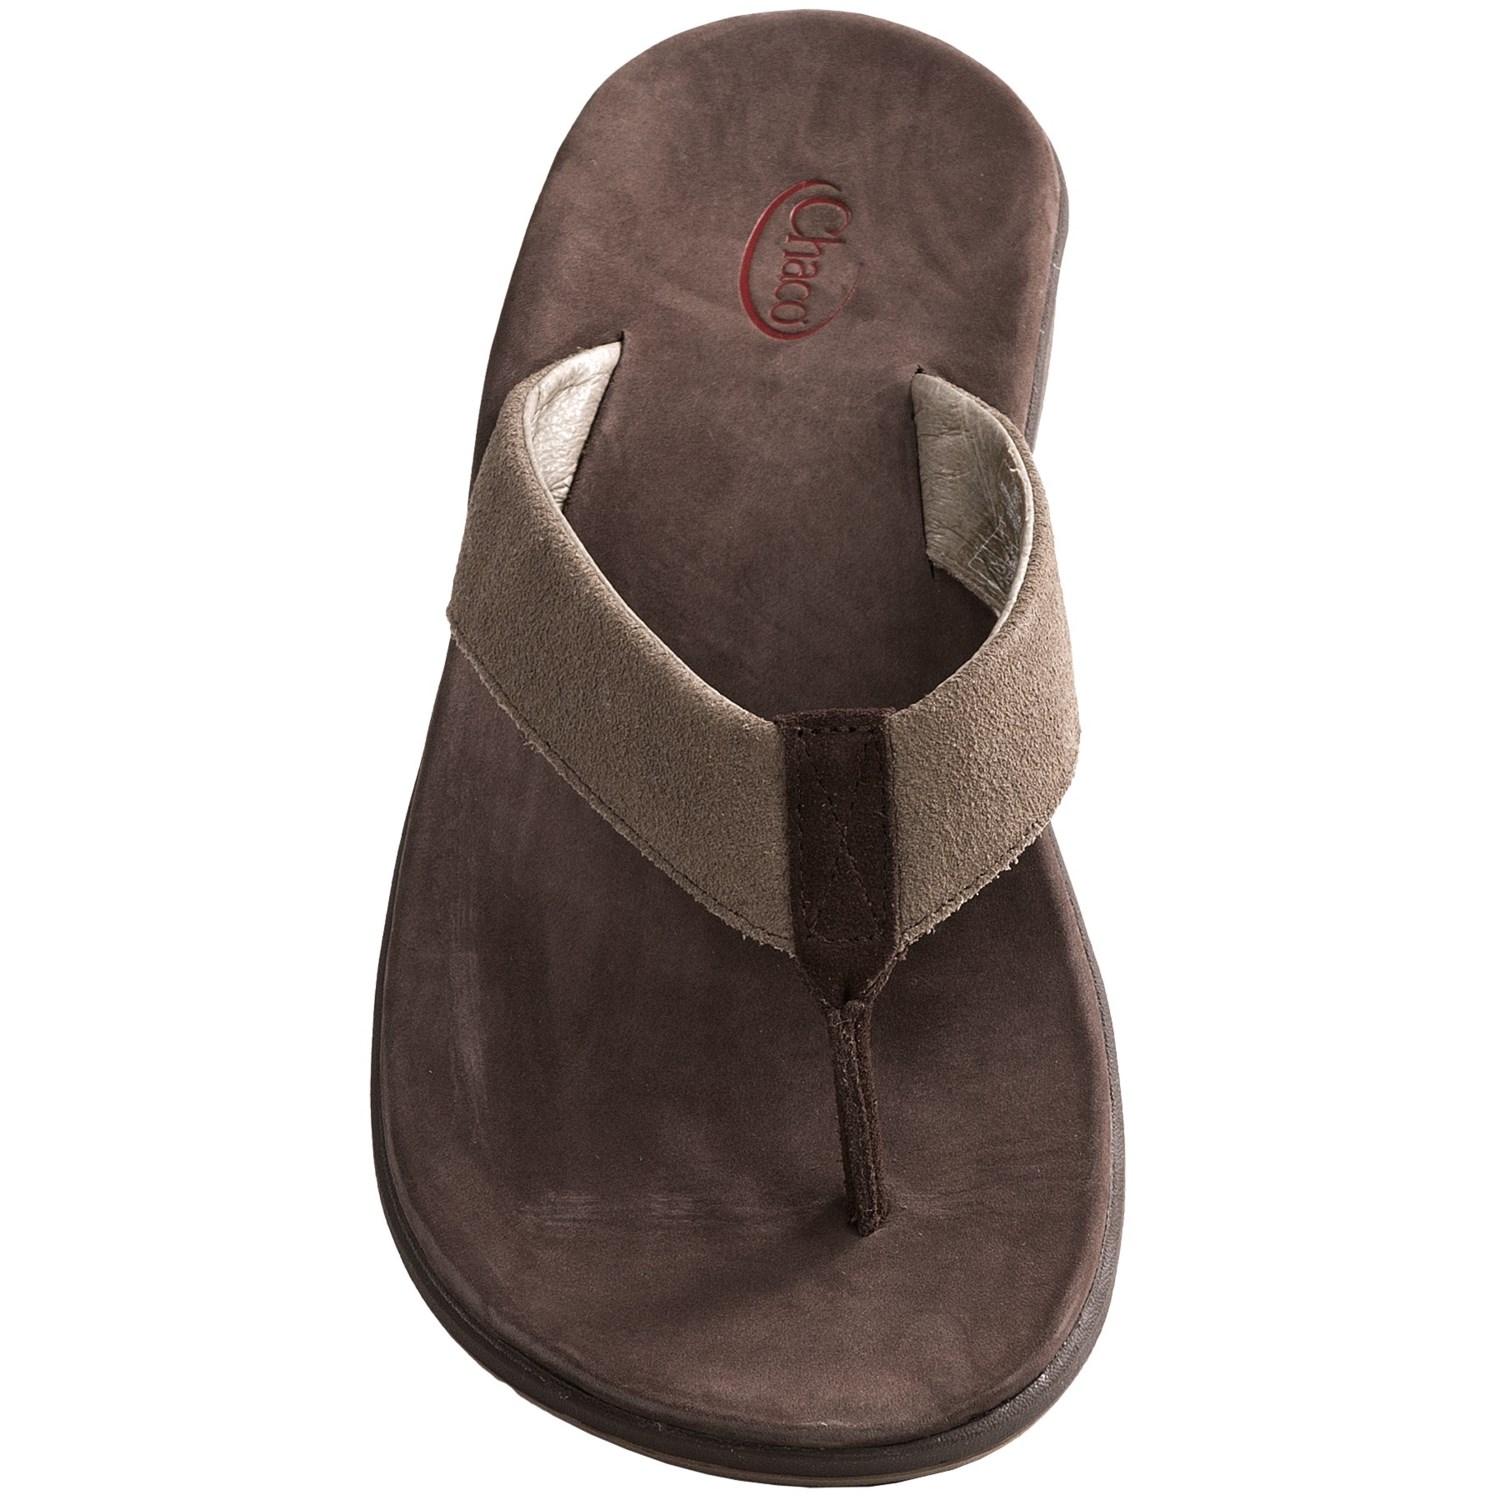 Chaco Kolb Sandals (For Men) 6510P - Save 50%